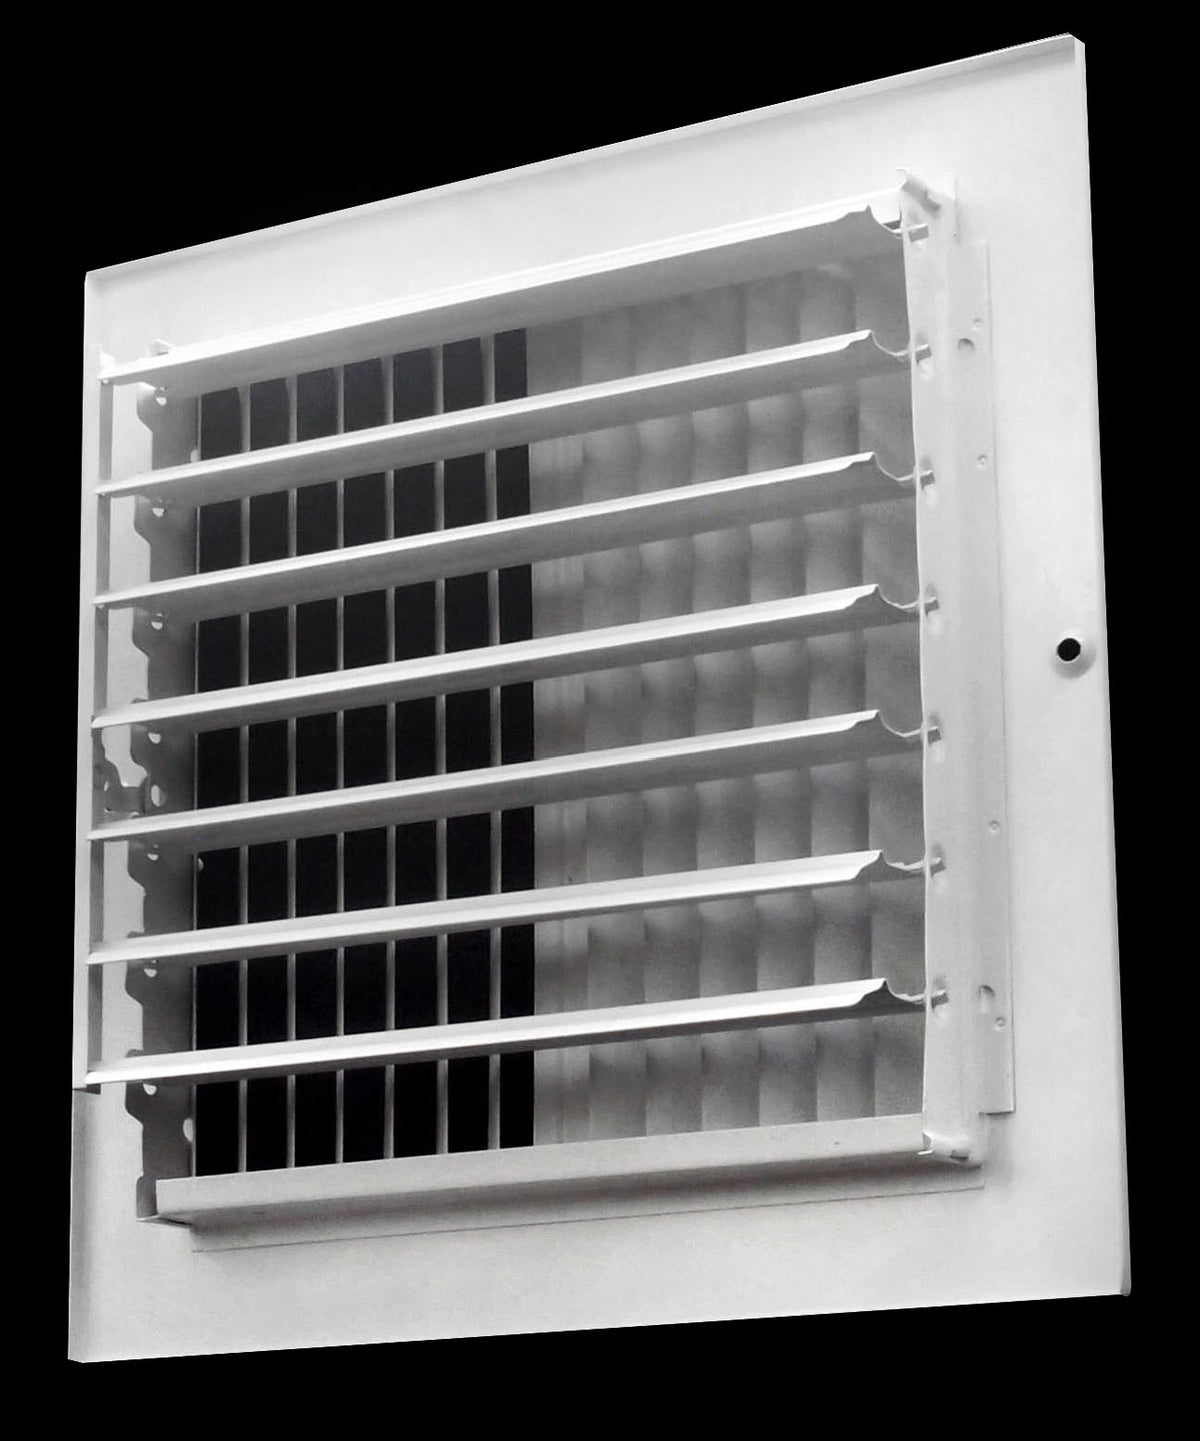 6&quot; X 6&quot; 2-Way AIR SUPPLY GRILLE - DUCT COVER &amp; DIFFUSER